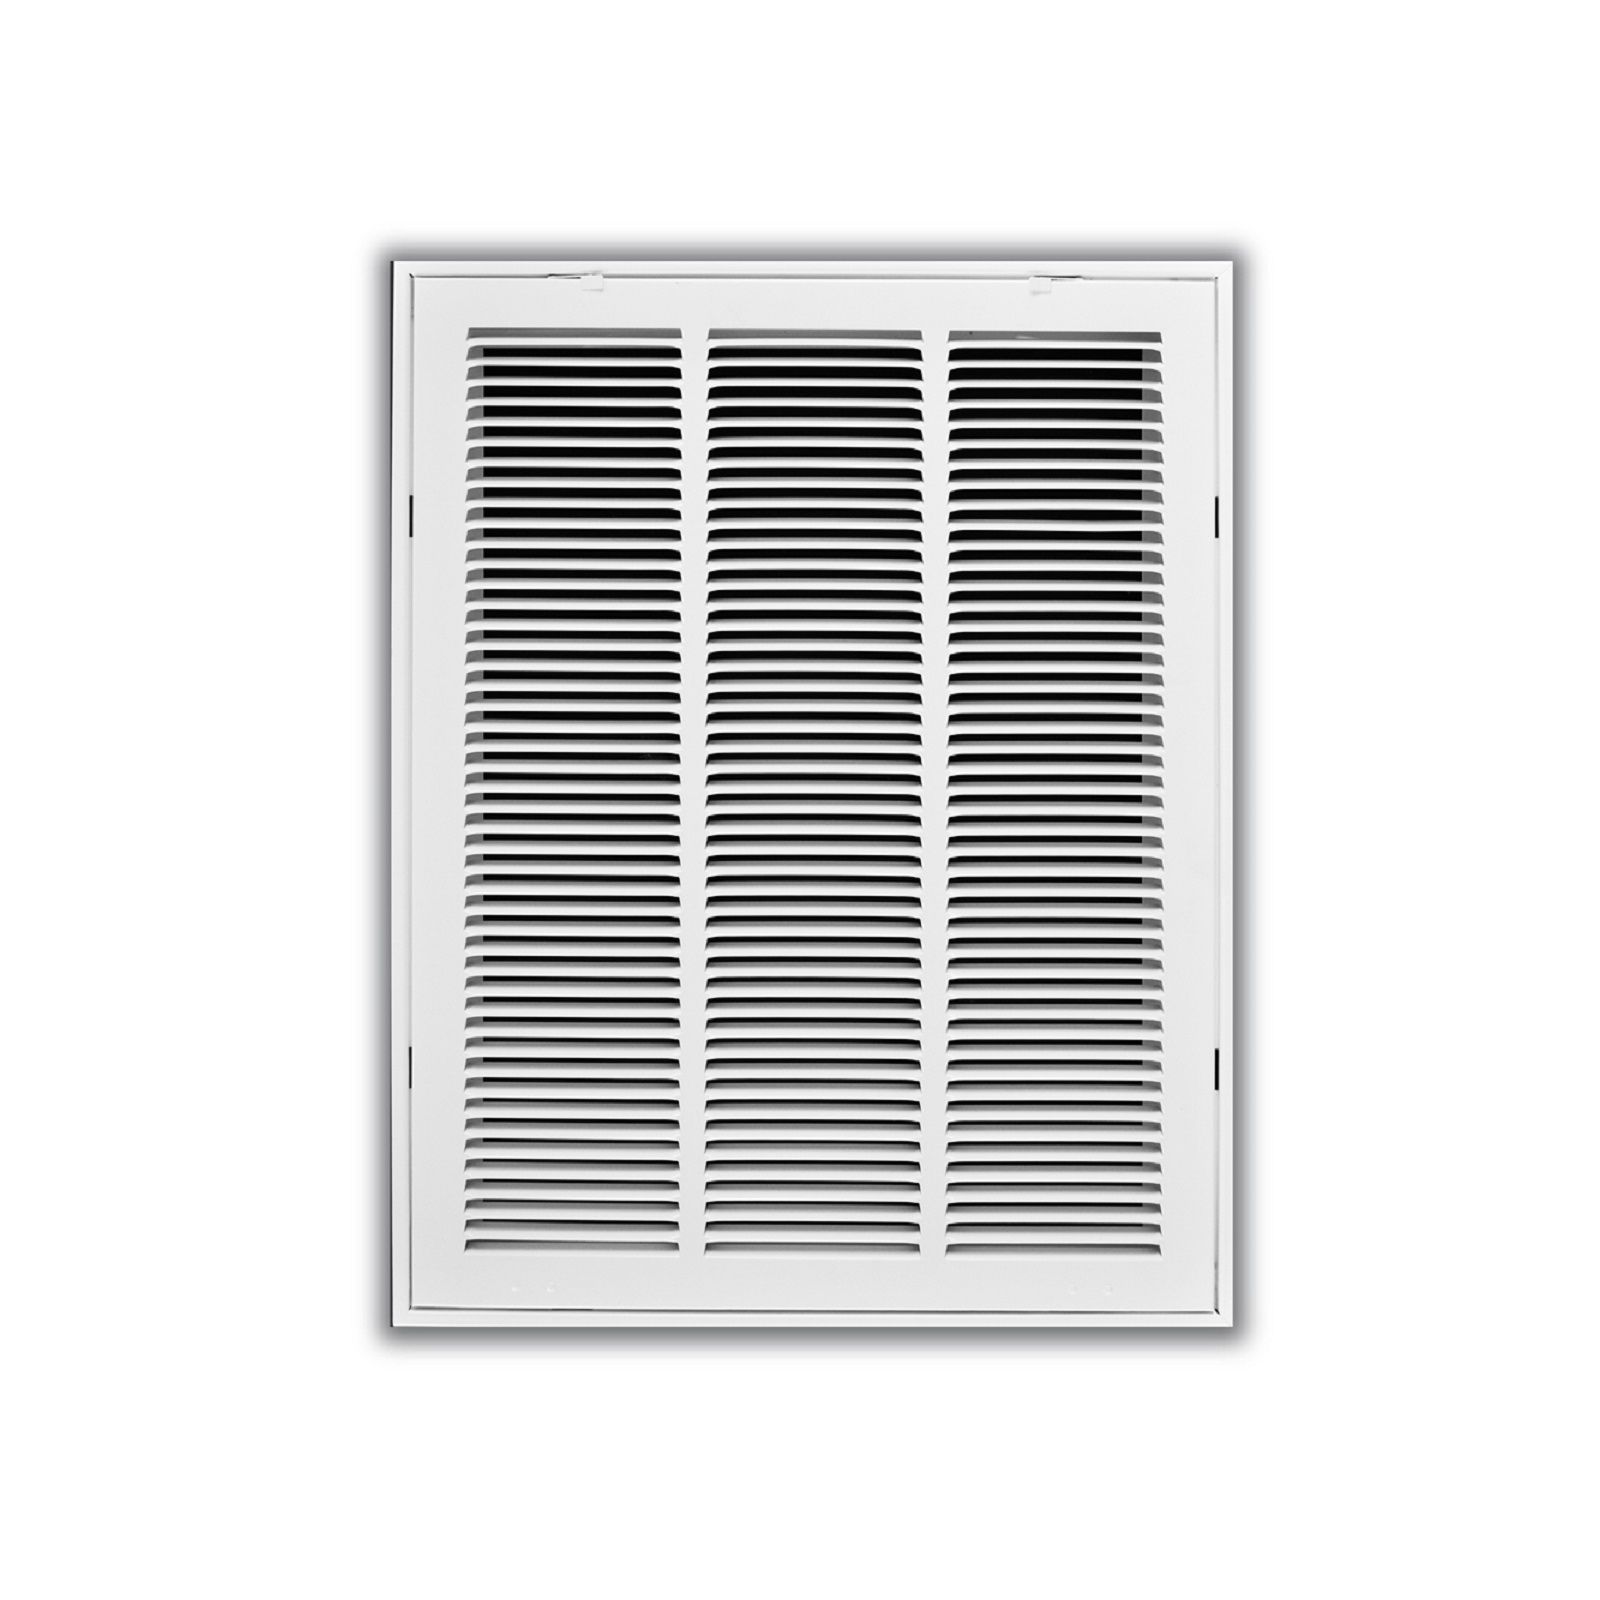 TRUaire 190 14X30 - Steel Return Air Filter Grille With Fixed Hinged Face, White, 14" X 30"